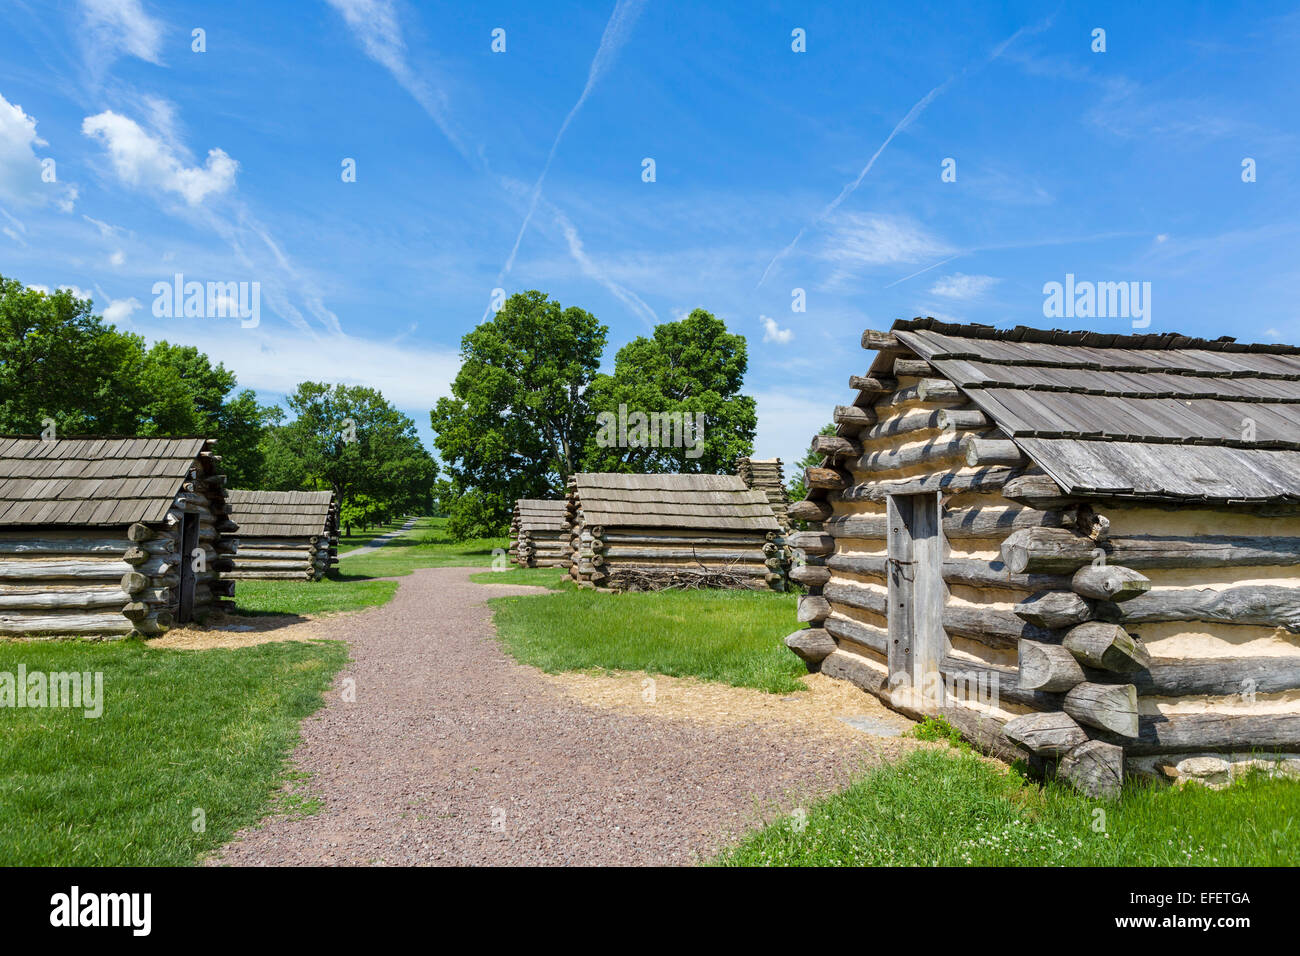 Reconstructed huts at the site of Muhlenberg's Brigade encampment, Valley Forge National Historical Park, Pennsylvania, USA Stock Photo